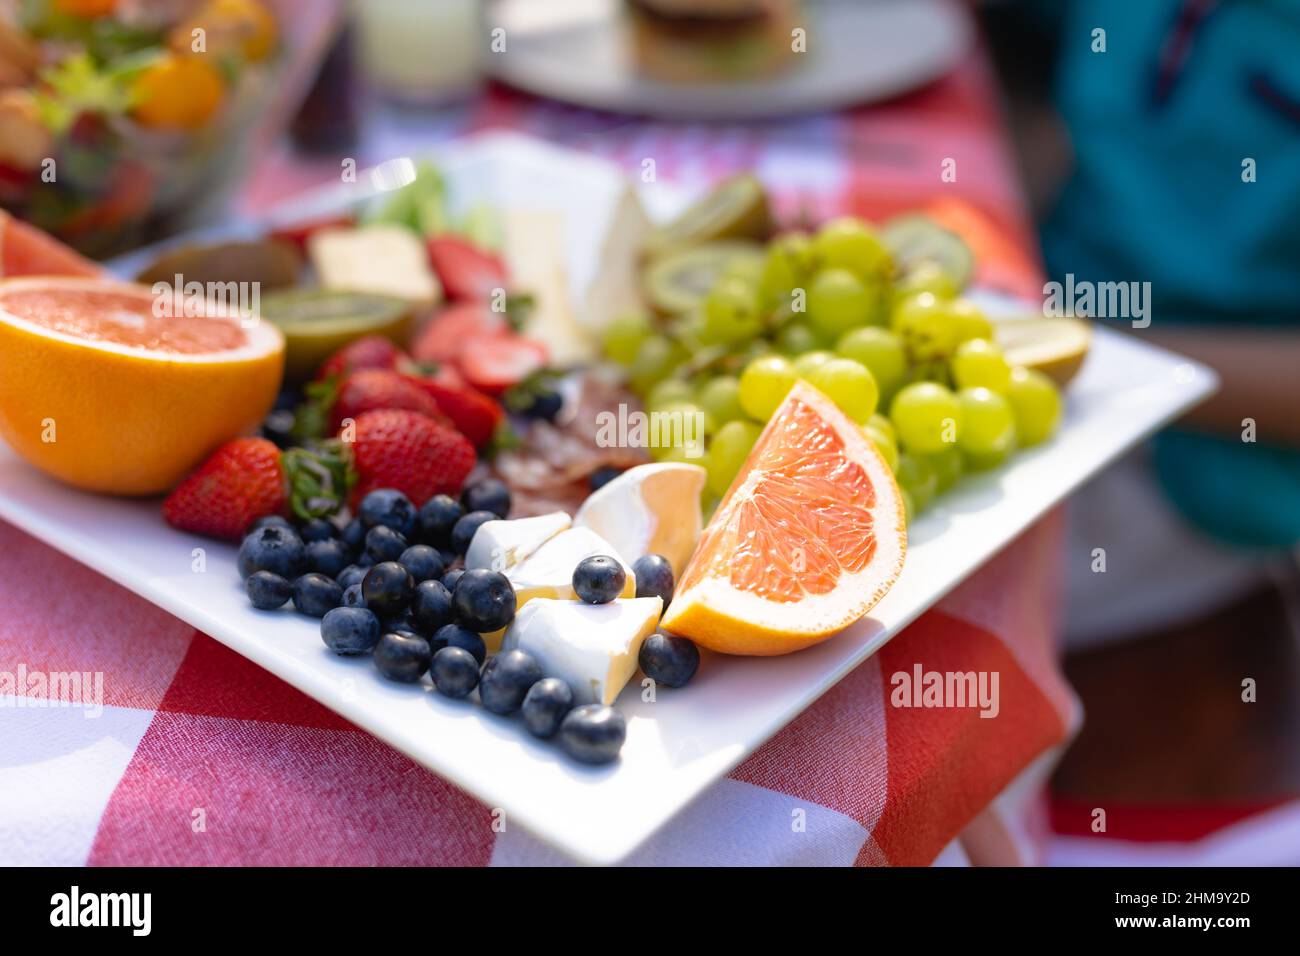 Close-up selective focus of various fruits with cheese slices in tray on table Stock Photo